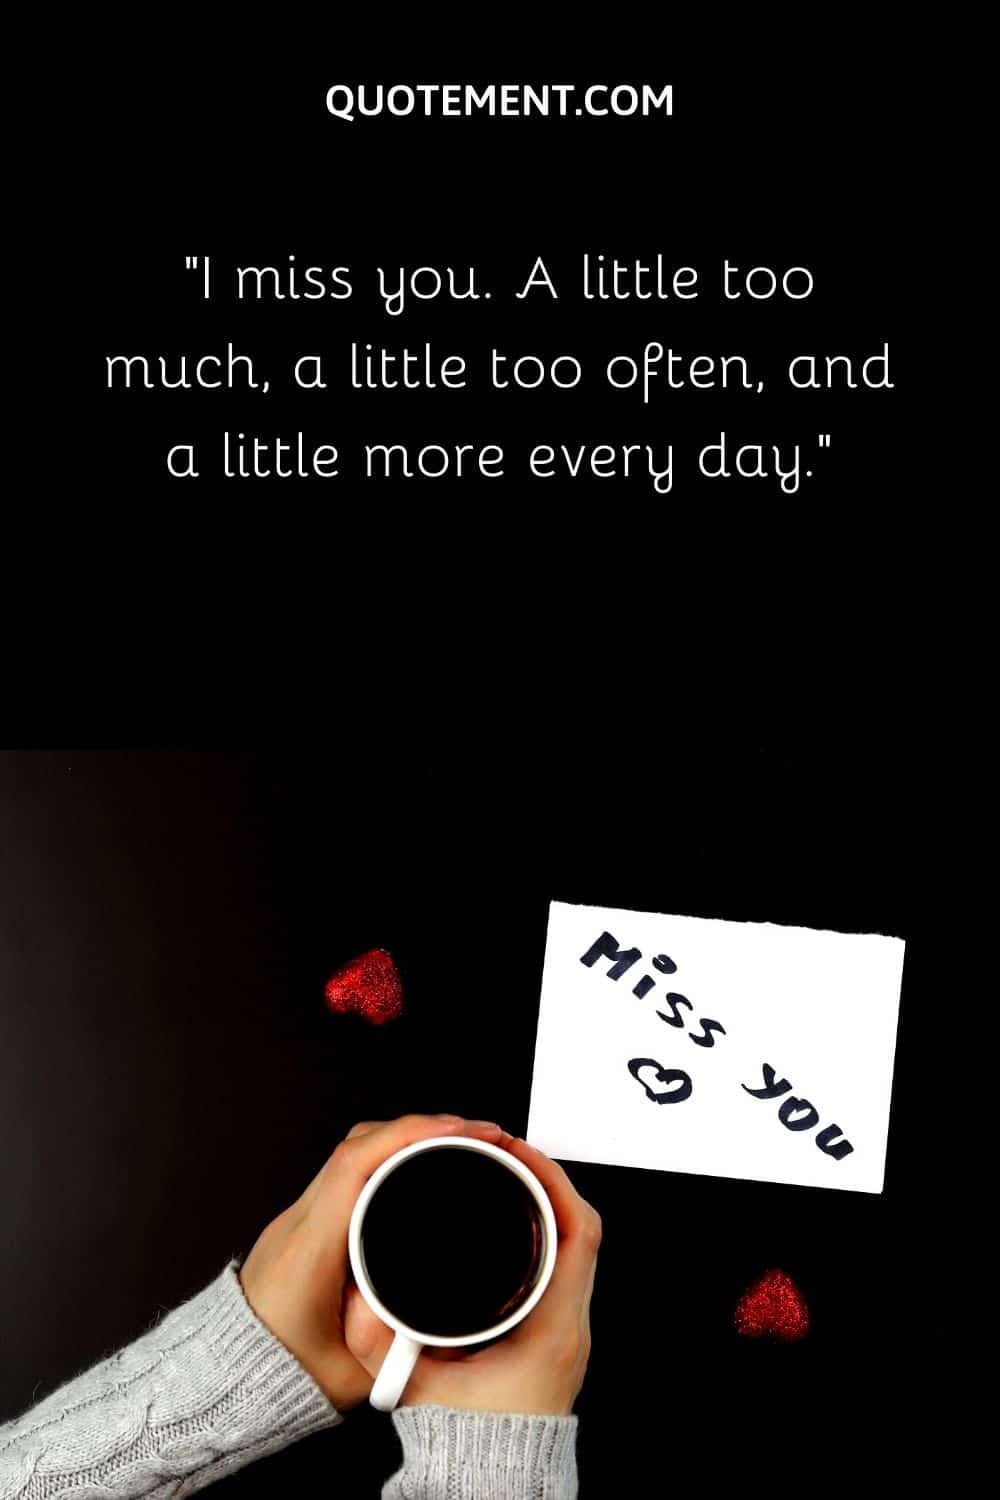 I miss you. A little too much